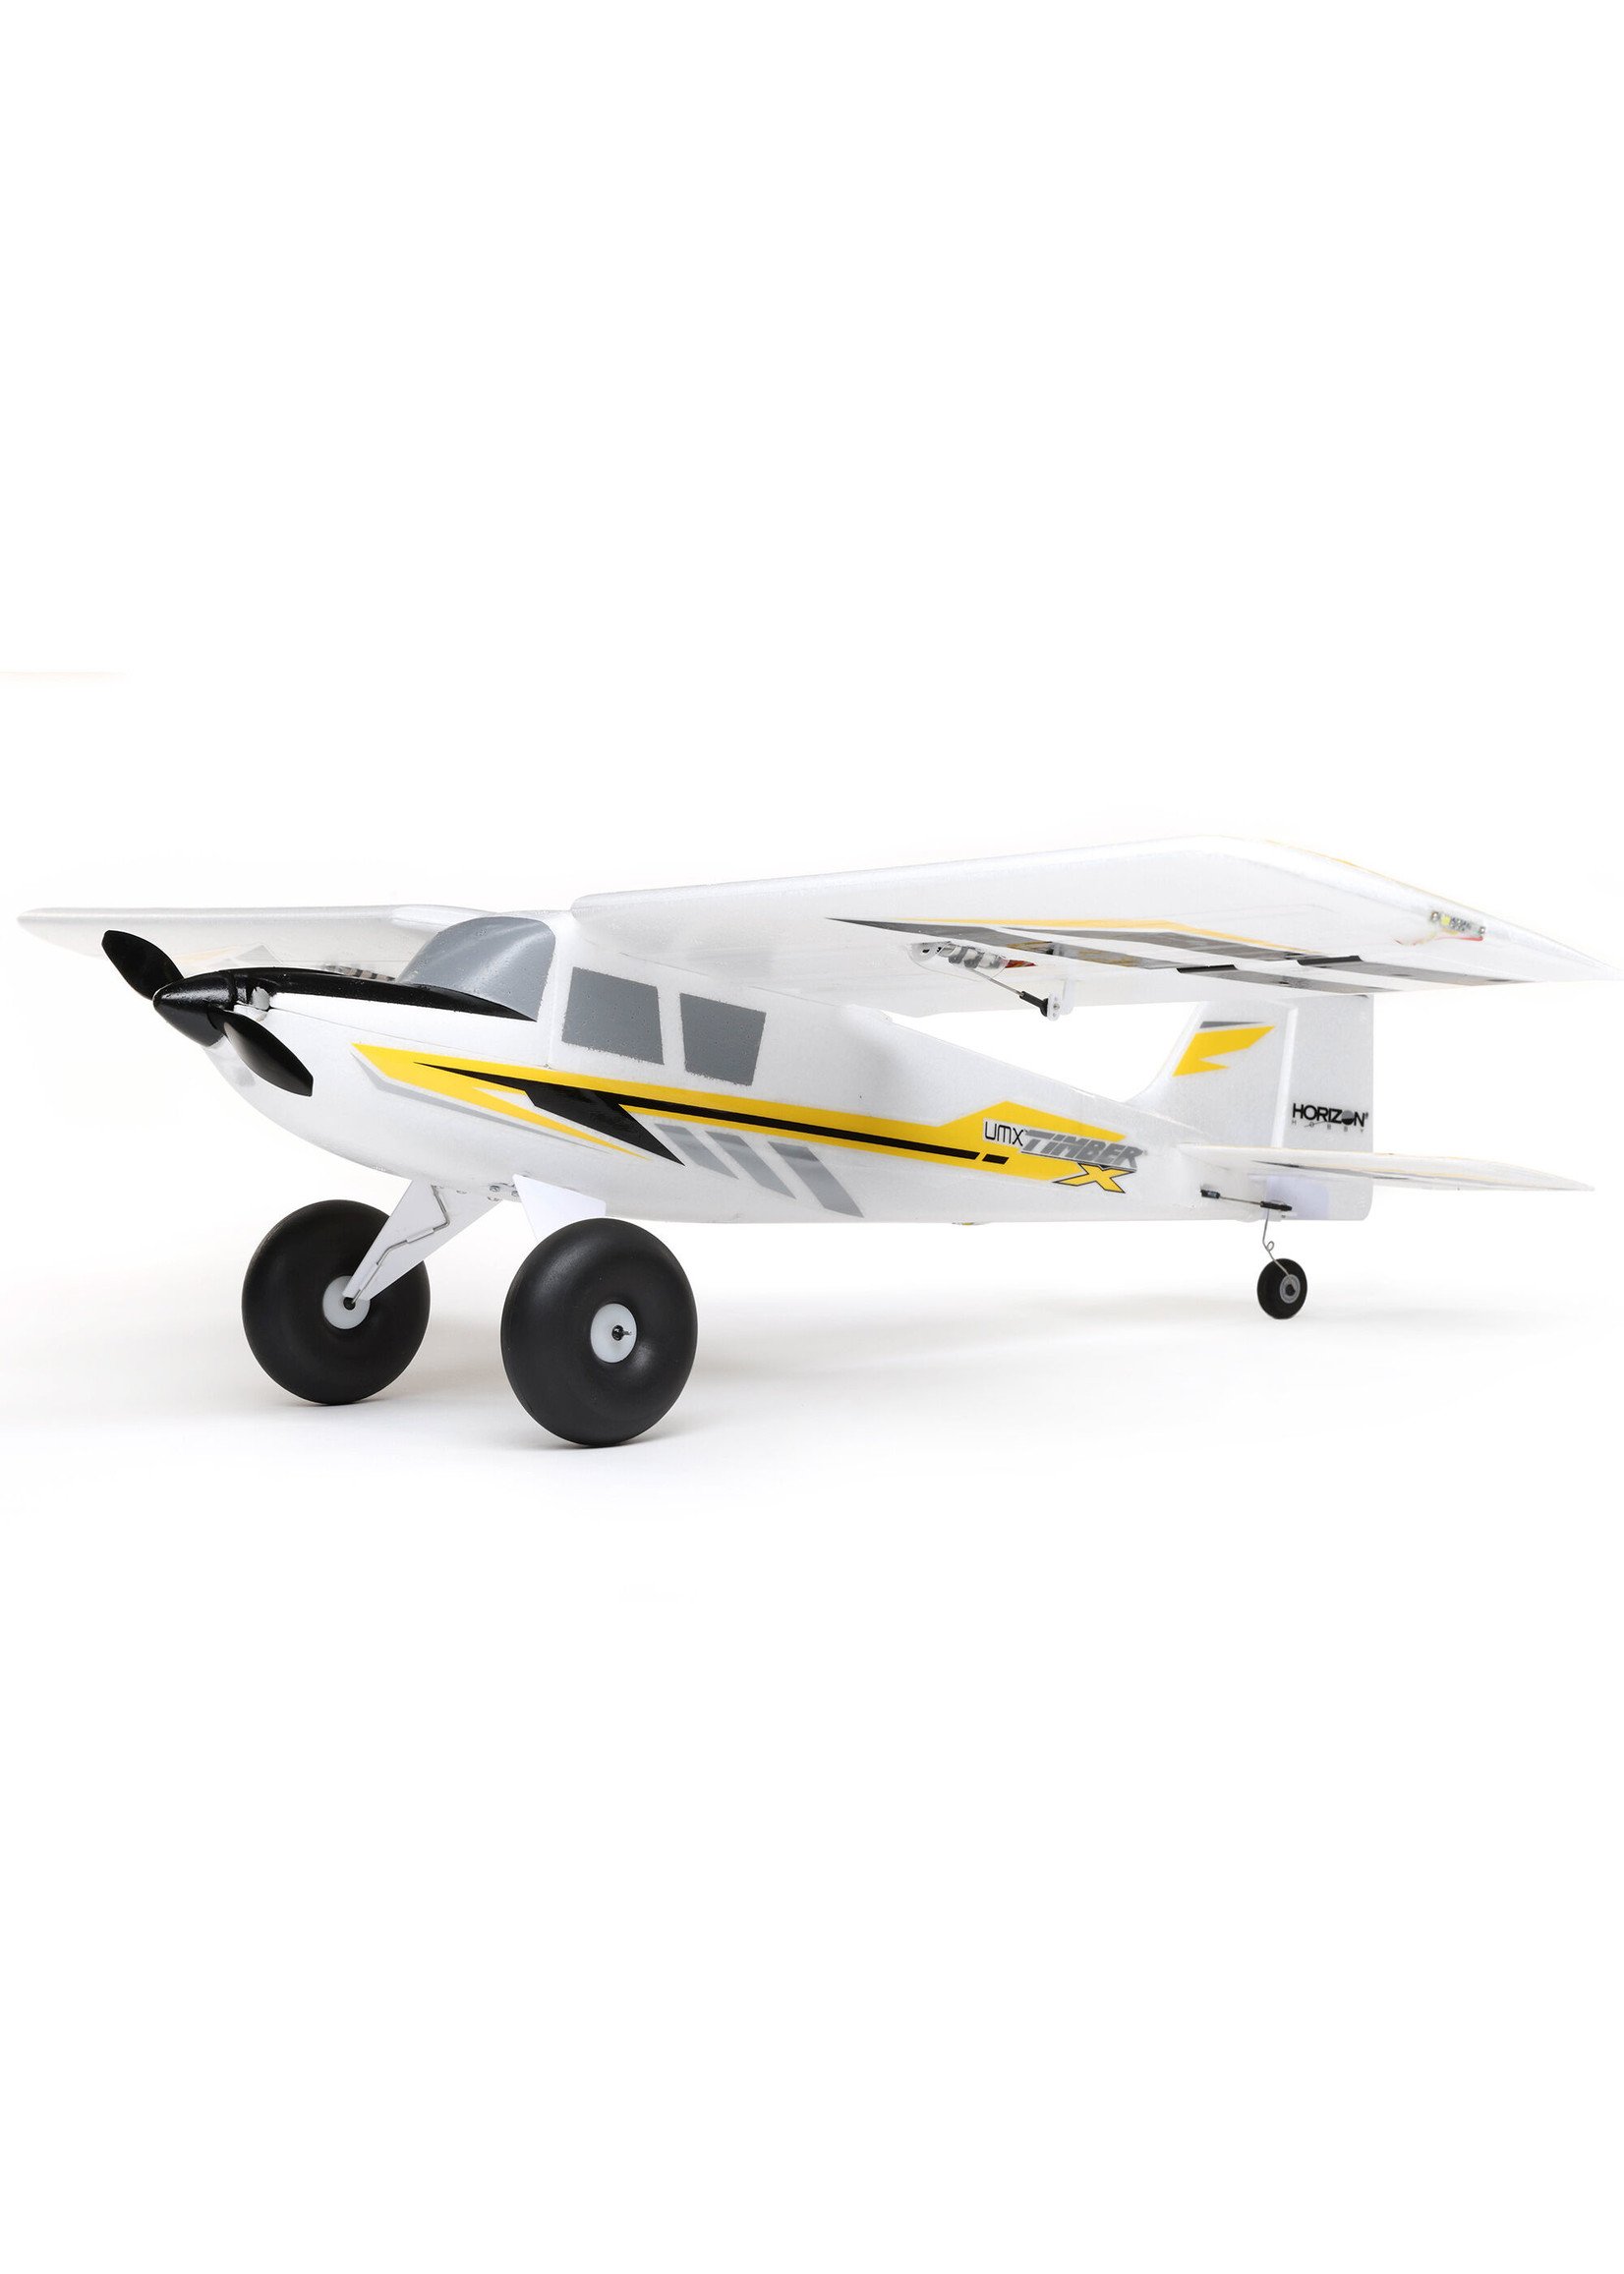 E-flite UMX Timber X BNF Basic with AS3X and SAFE Select - 570mm